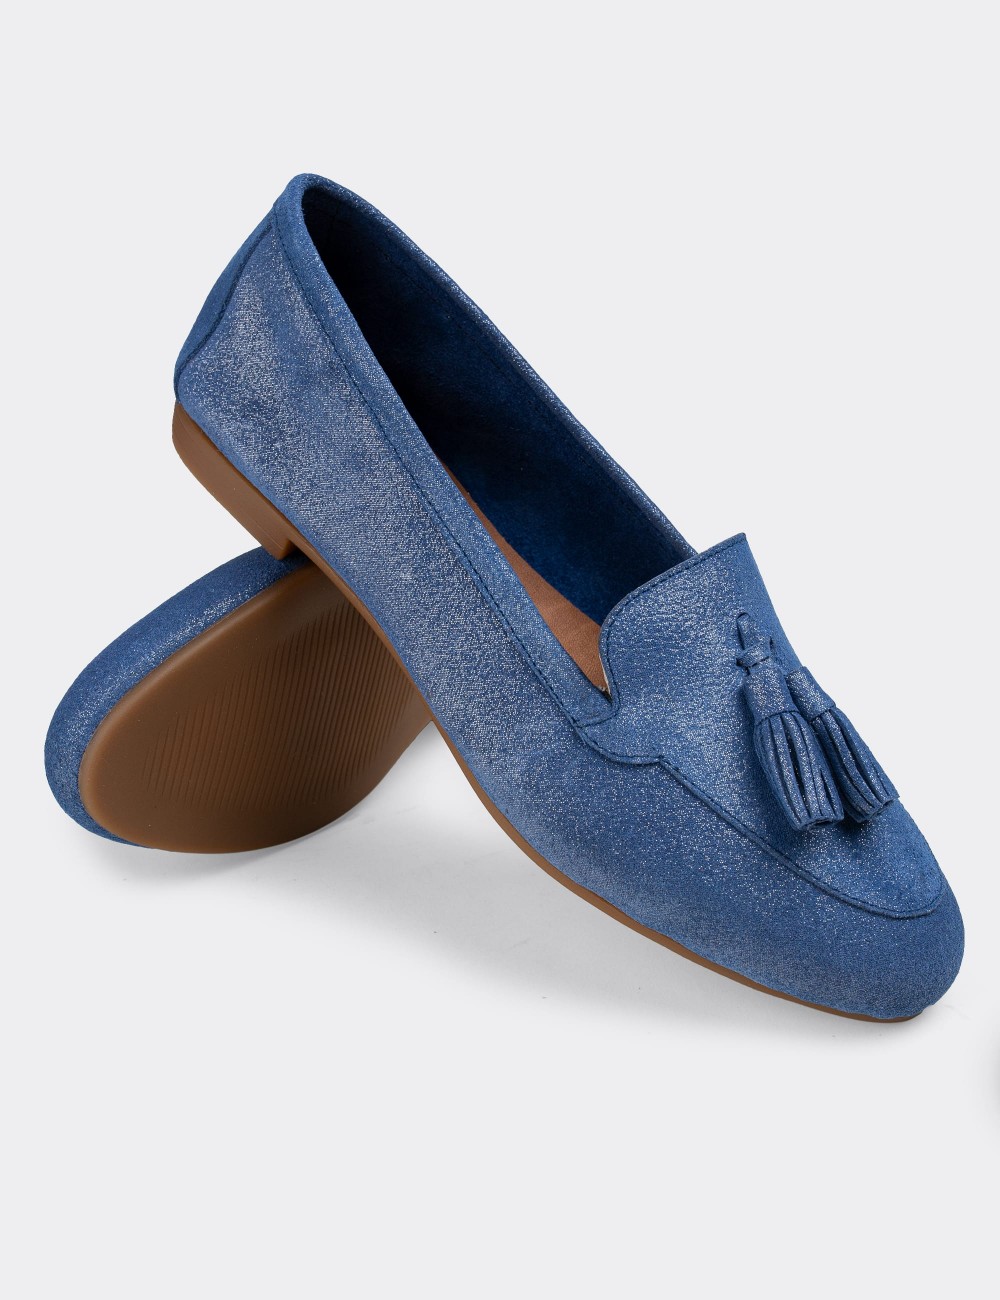 Blue Suede Leather Loafers - E3209ZMVIC02